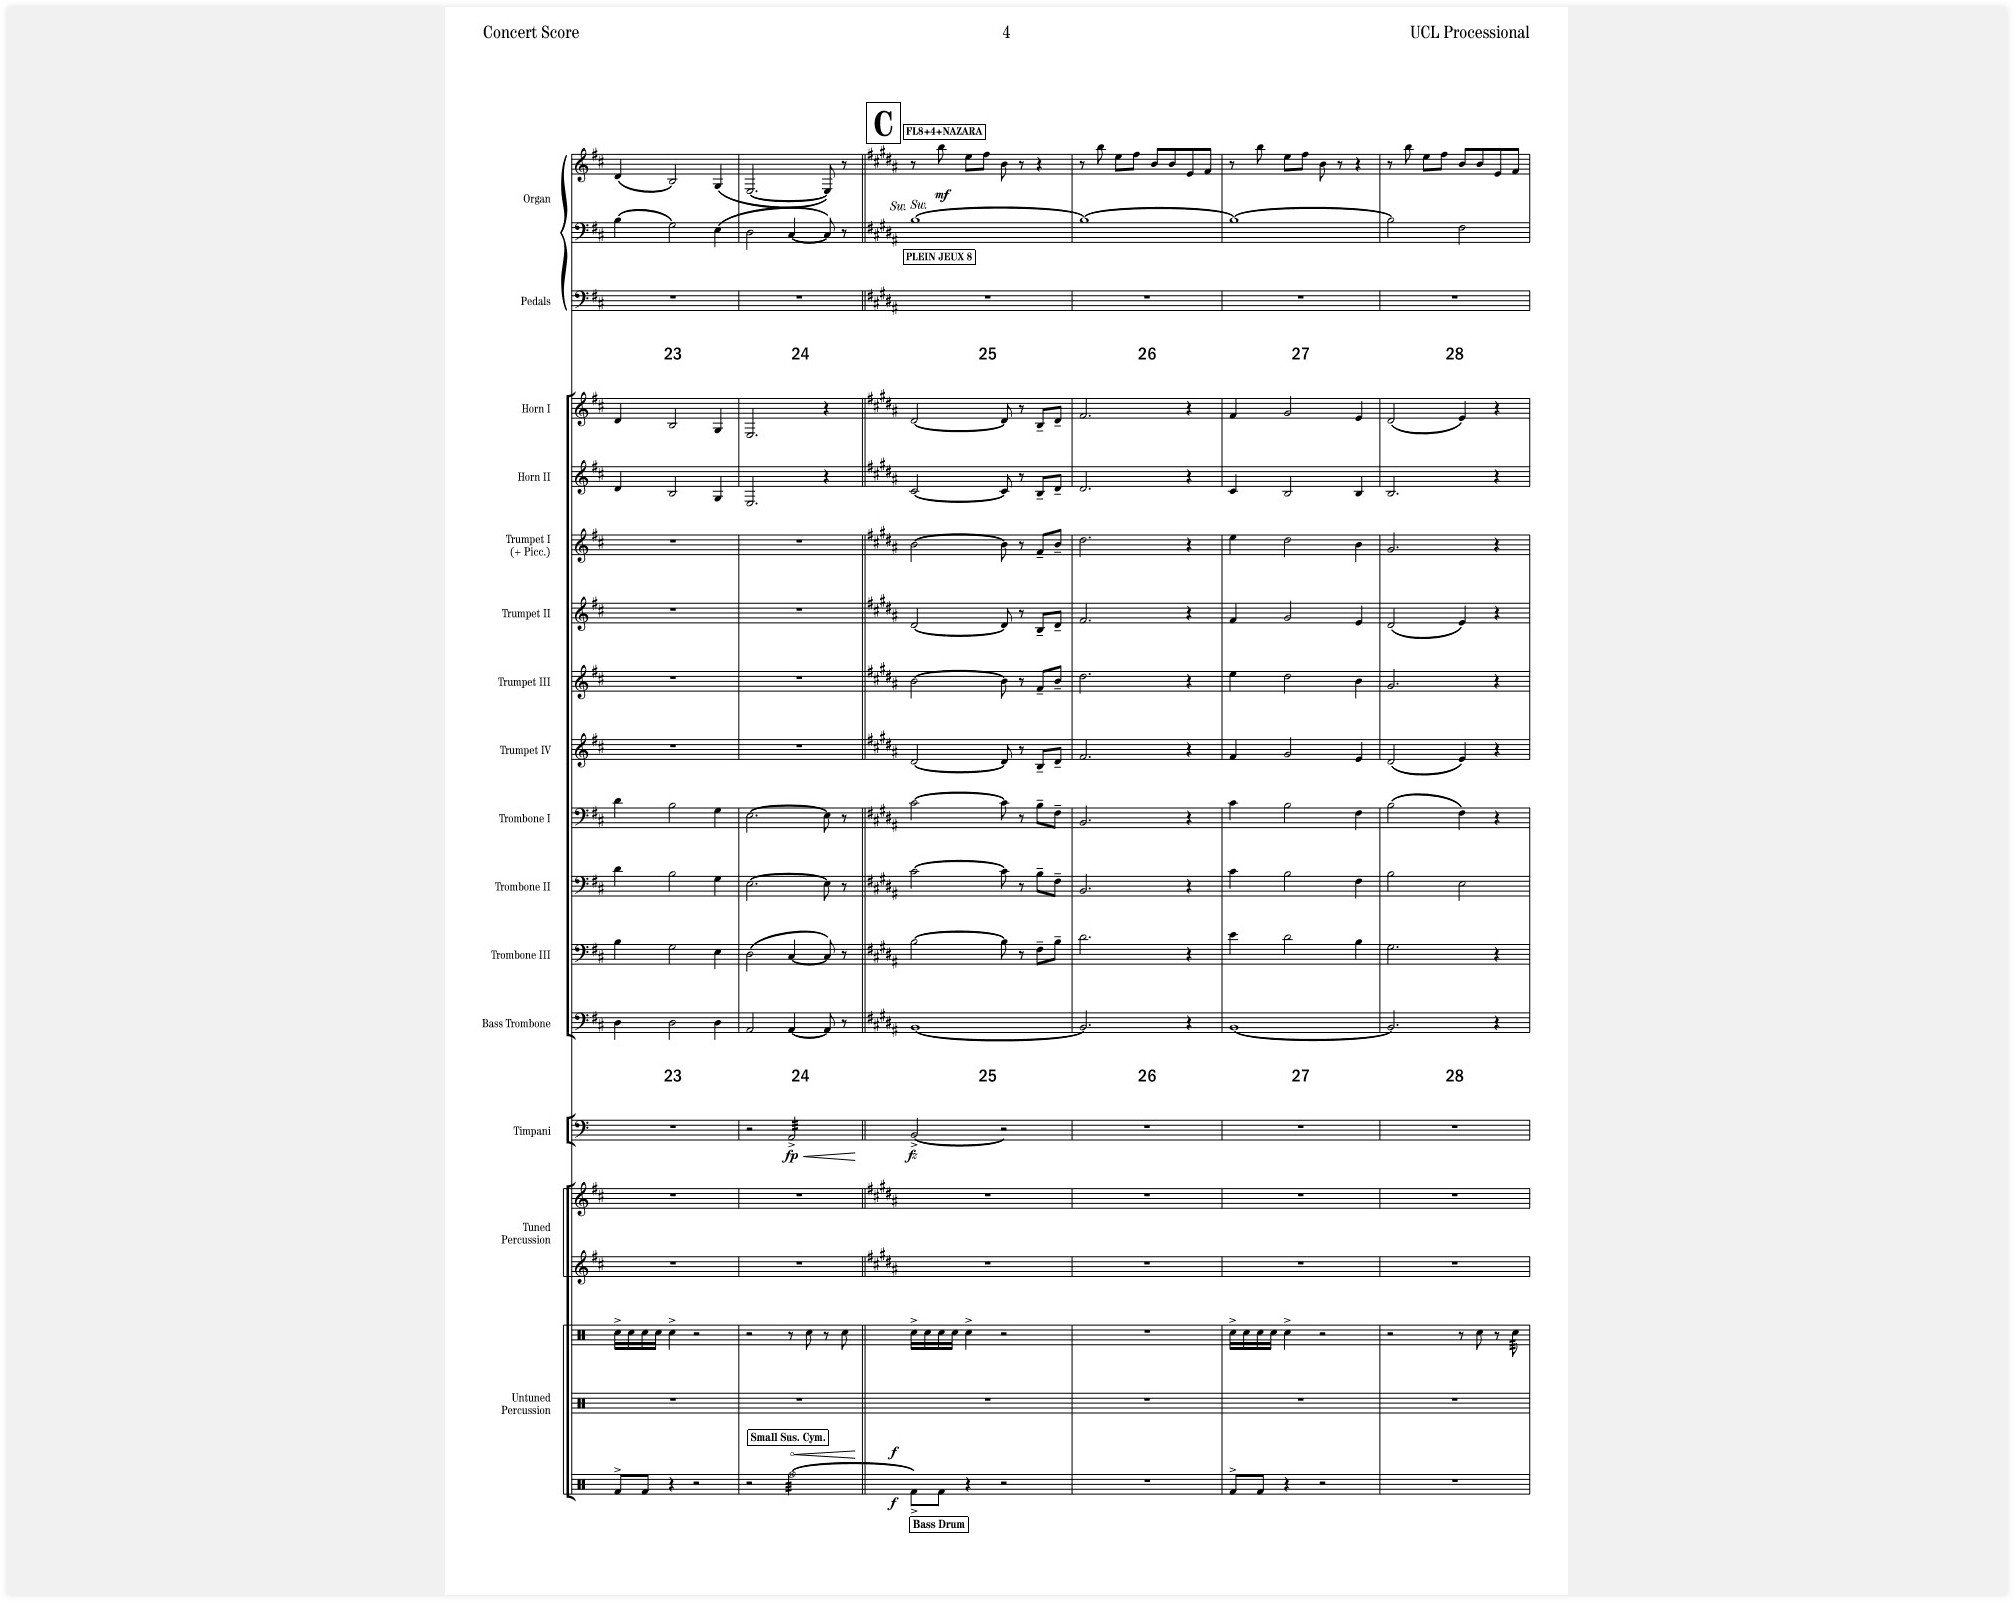 Processional and Recessional (Faber) - Concert Score_6.jpg